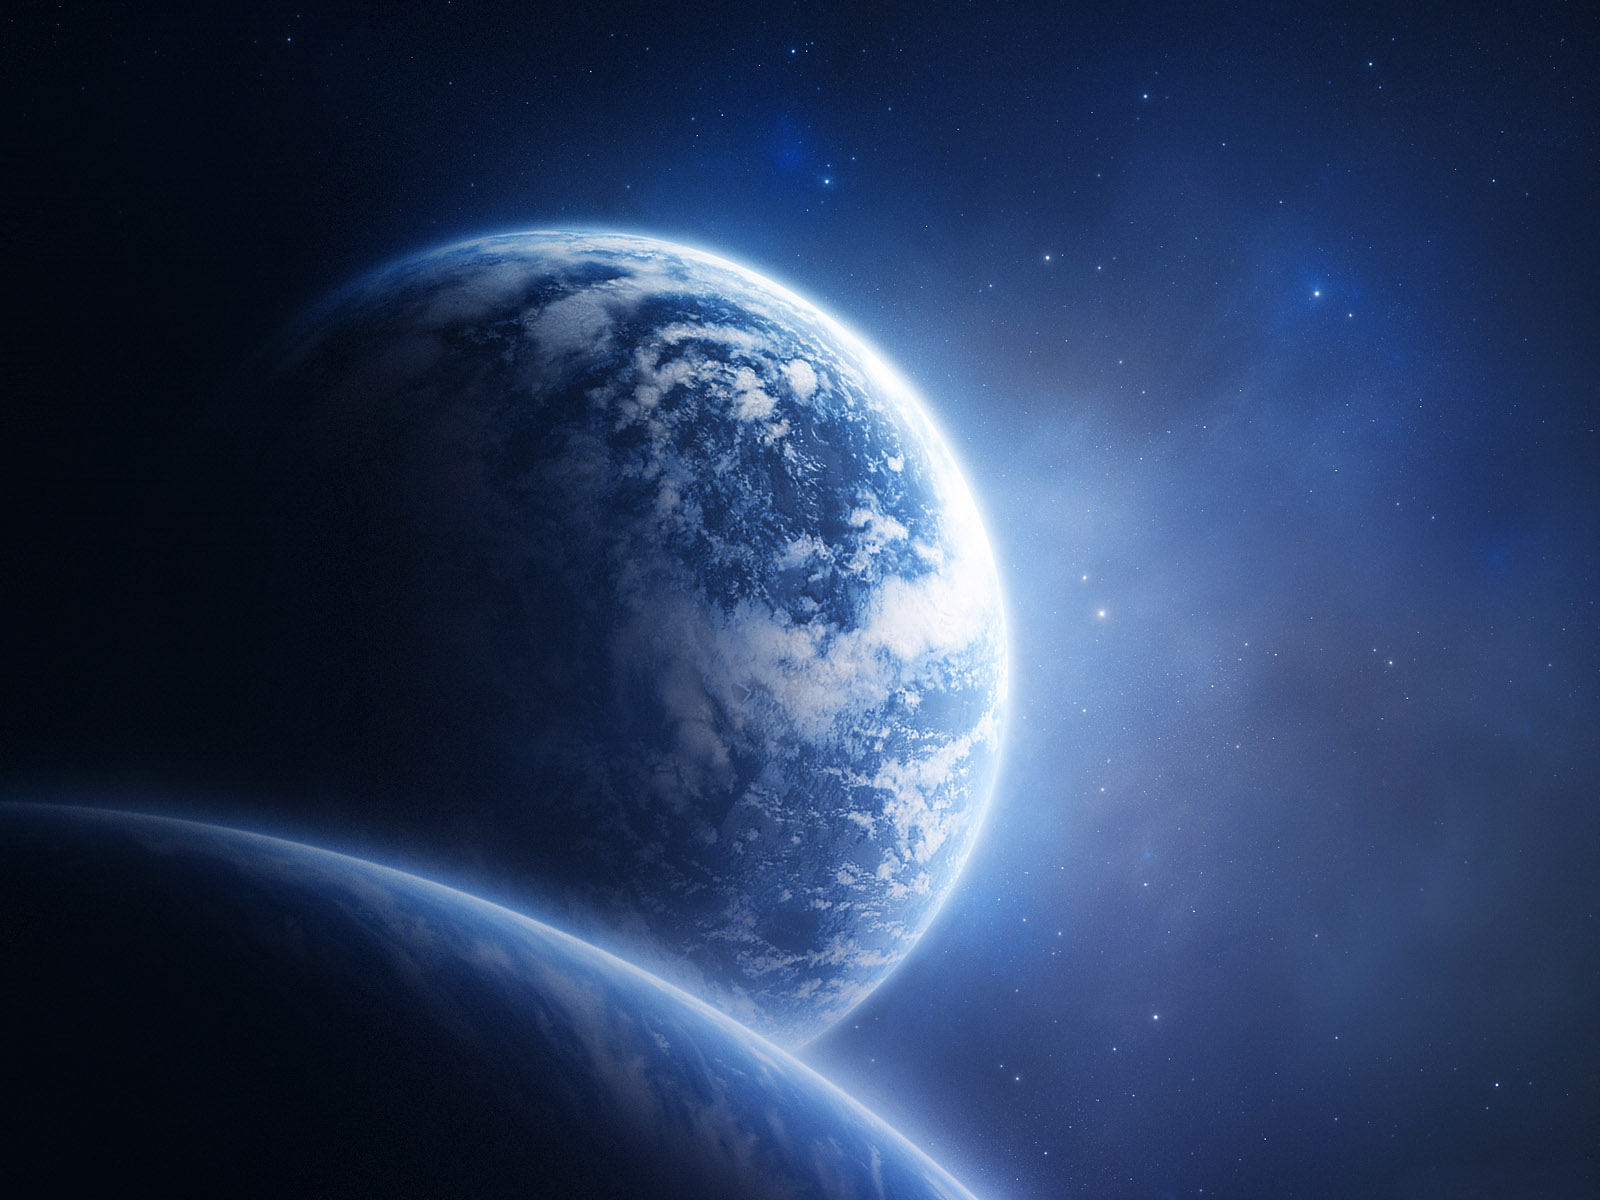 HD Space Wallpapers 1080P Galaxy wallpaper 1080p